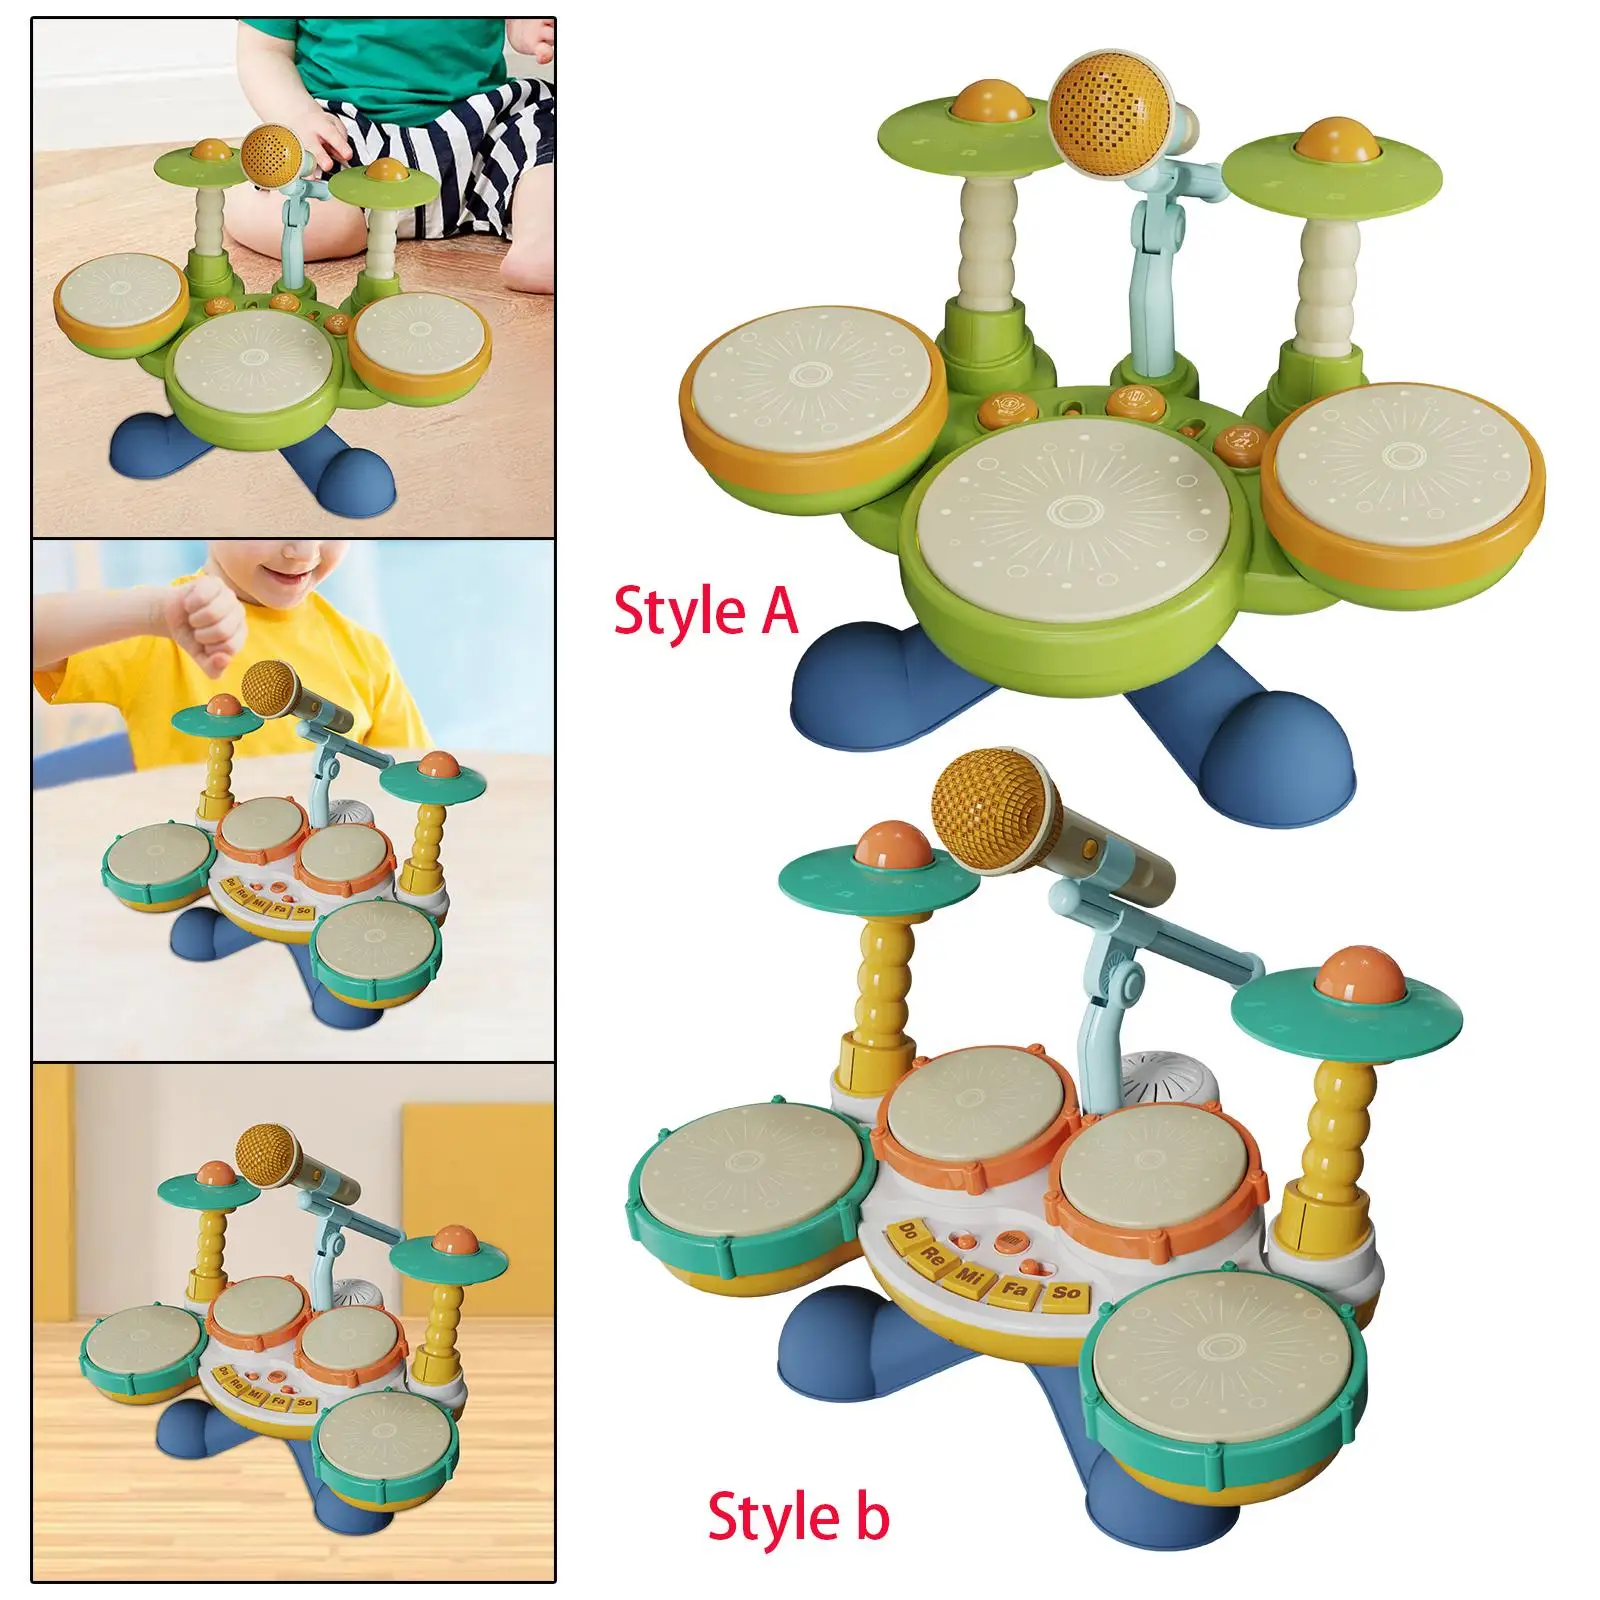 Early Educamional Toys Birthday Gift Learning Light up Toy Musical Drum Toy